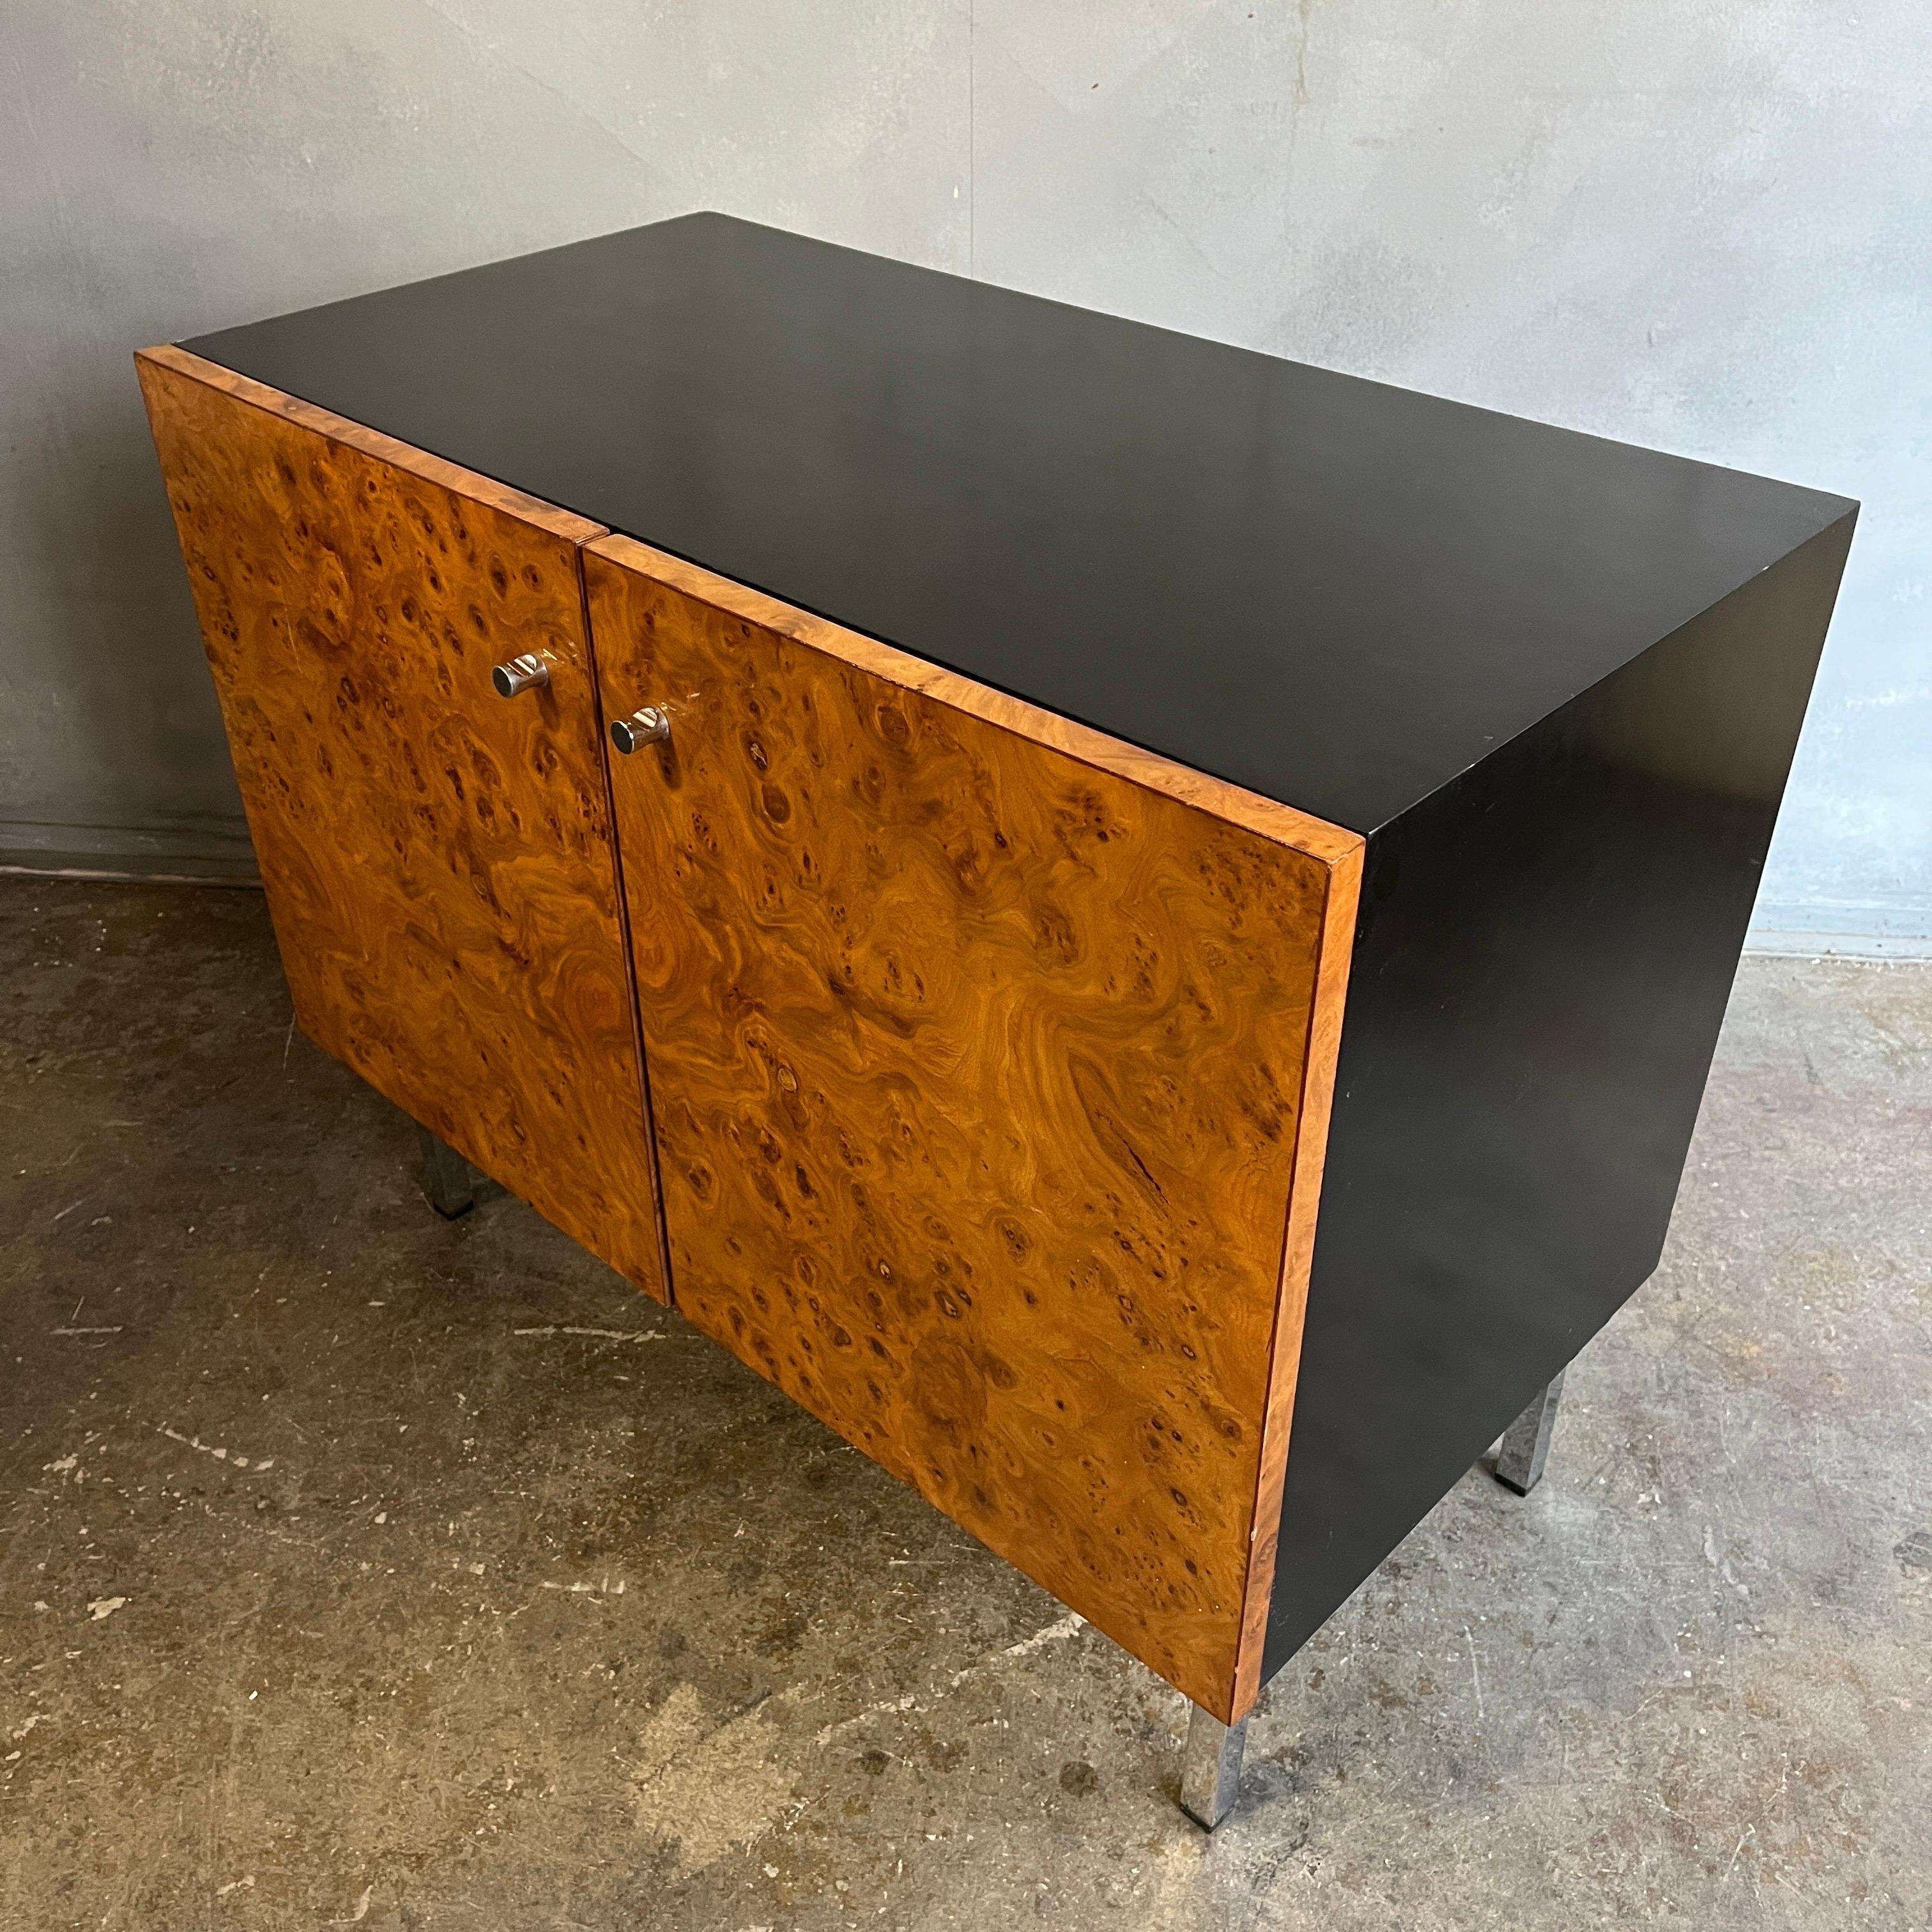 American Midcentury lacquered Credenza or Cabinet in Burl Wood